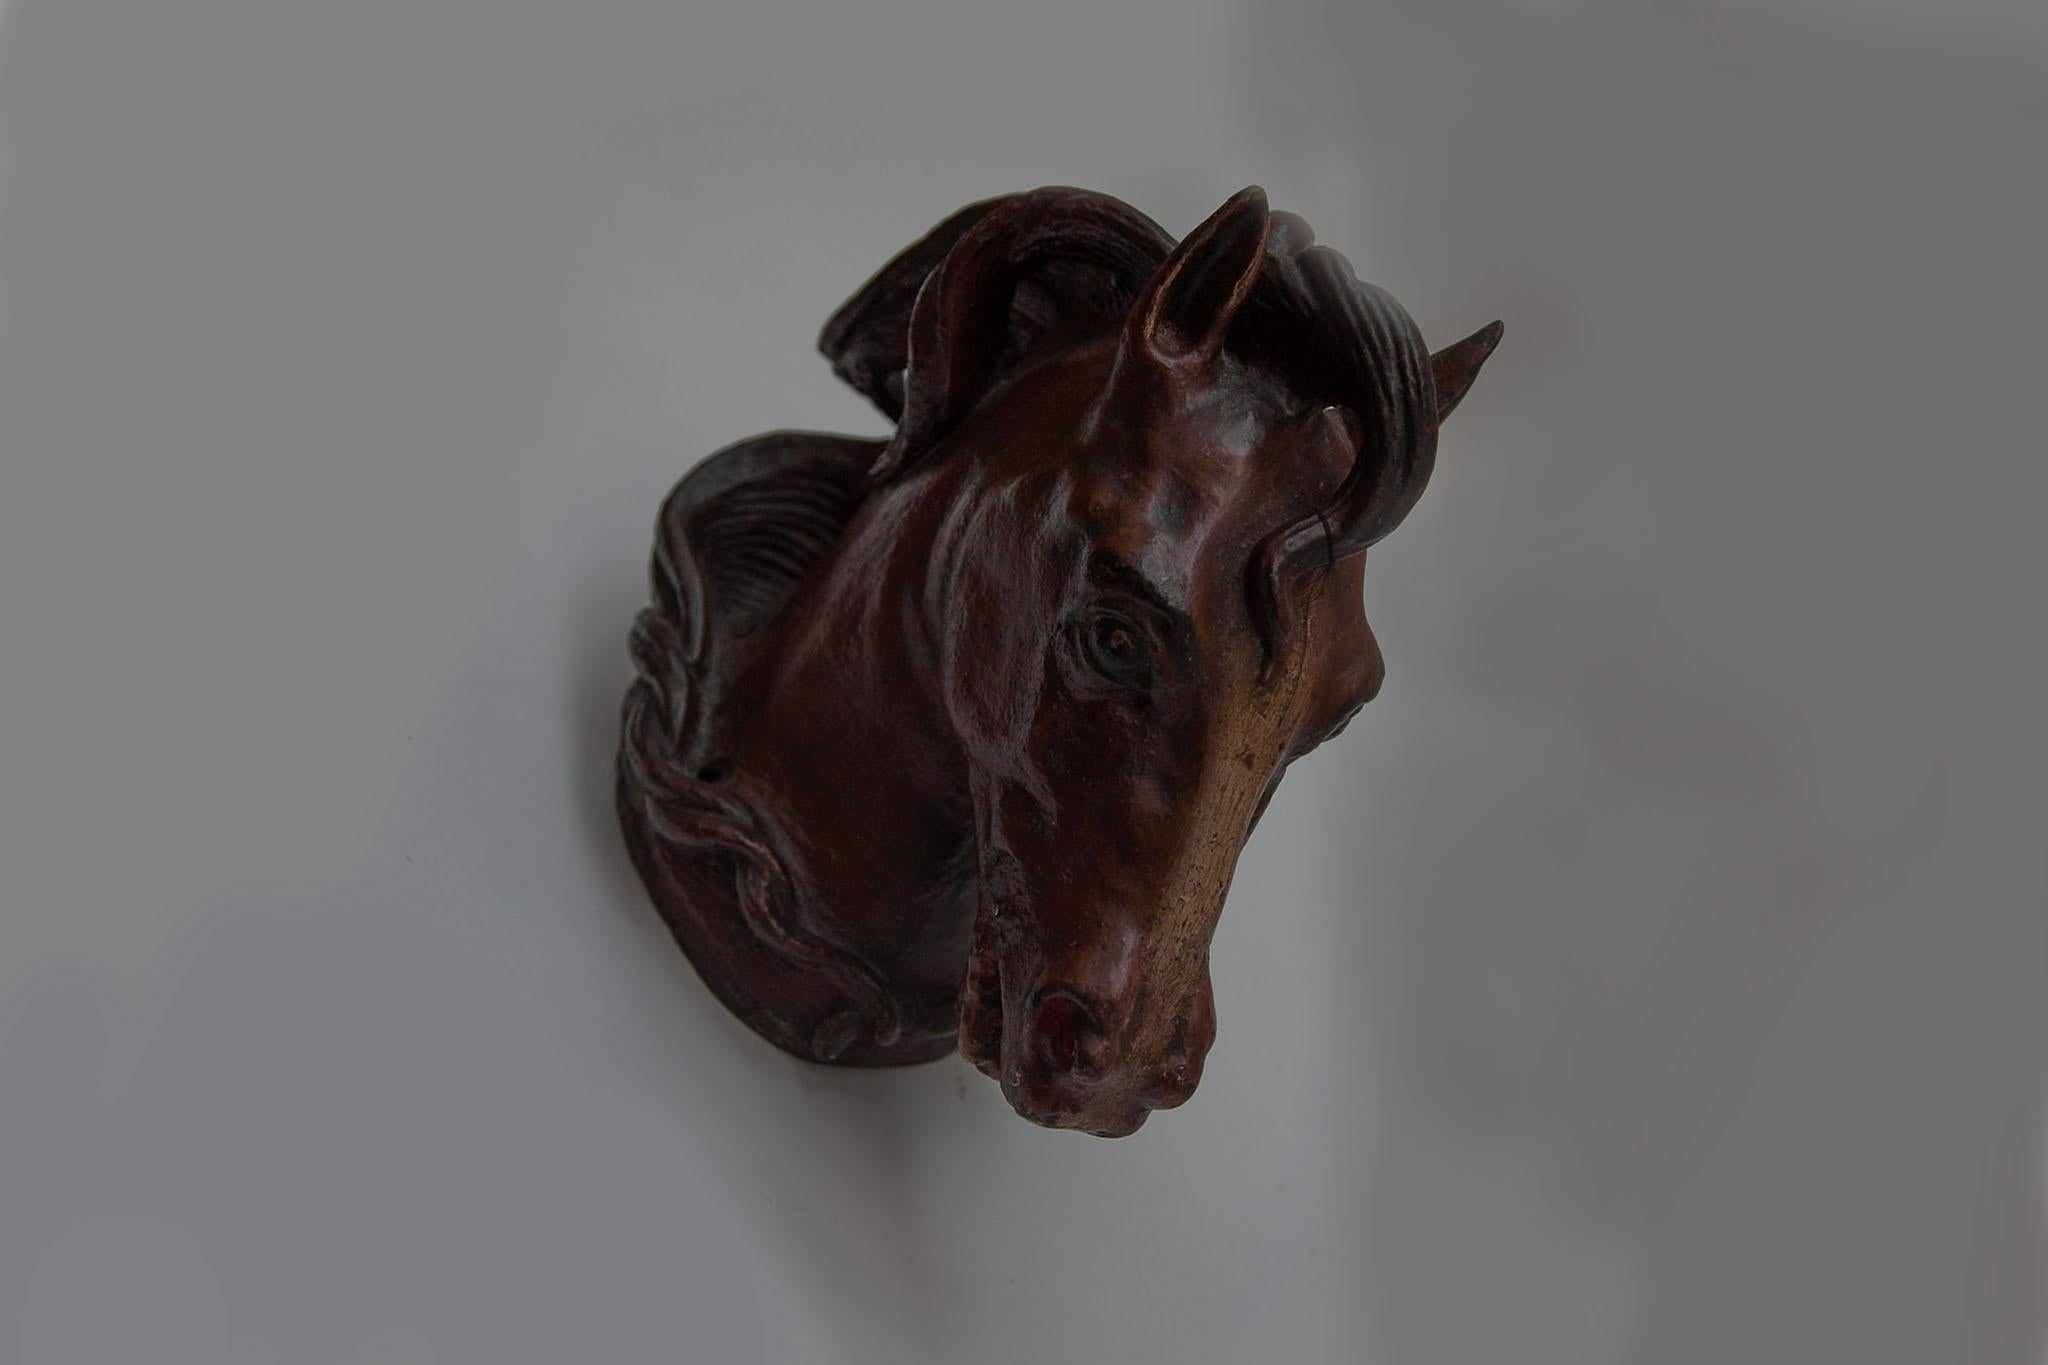 Hand-Crafted Wall Mounted Impressive Life Size Horses Head For Sale